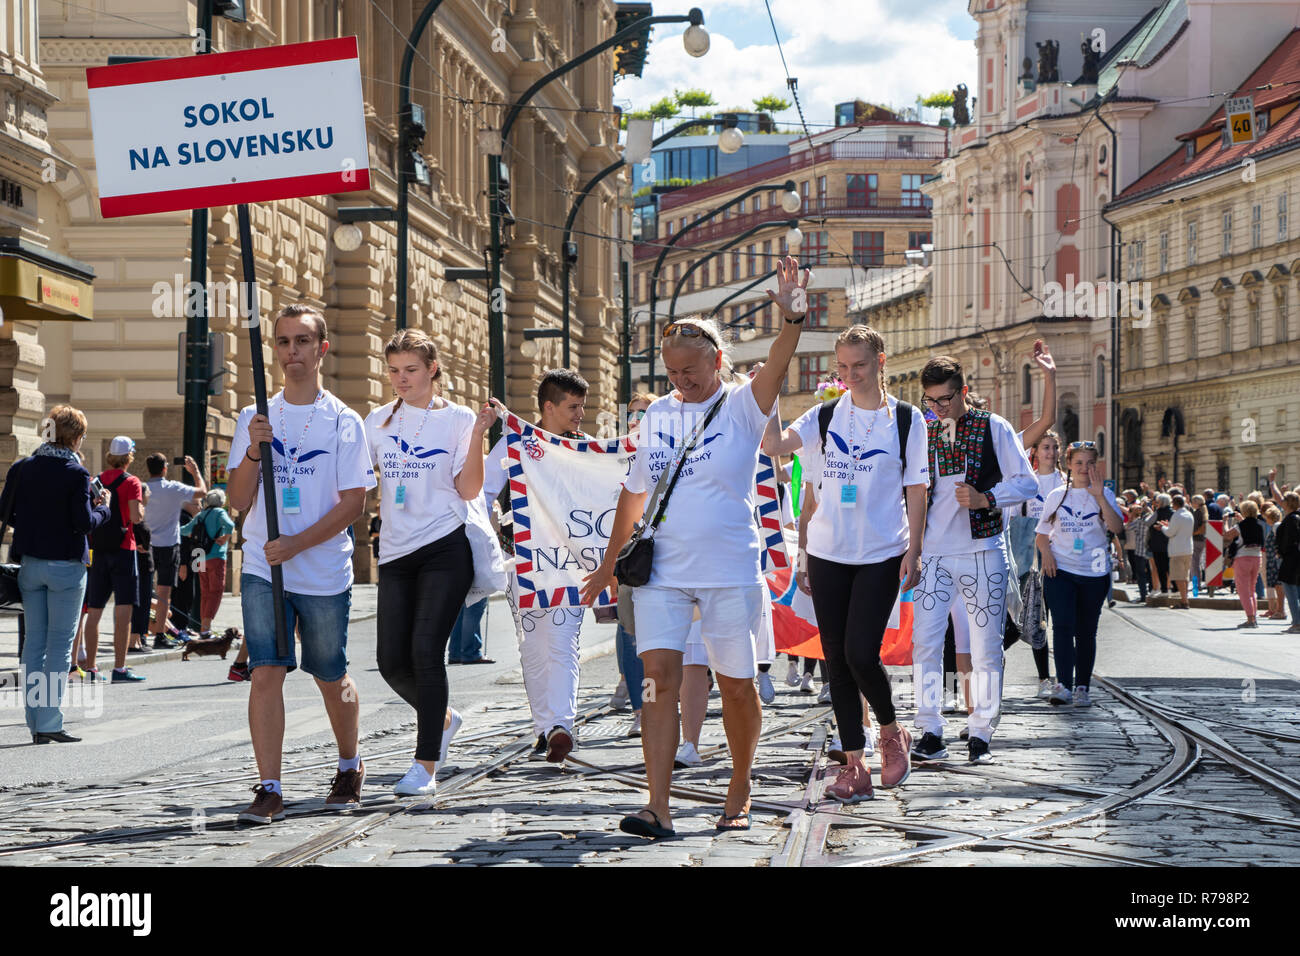 PRAGUE, CZECH REPUBLIC - JULY 1, 2018: Visitors from Slovakia parading at Sokolsky Slet, a once-every-six-years gathering of the Sokol movement - a Cz Stock Photo